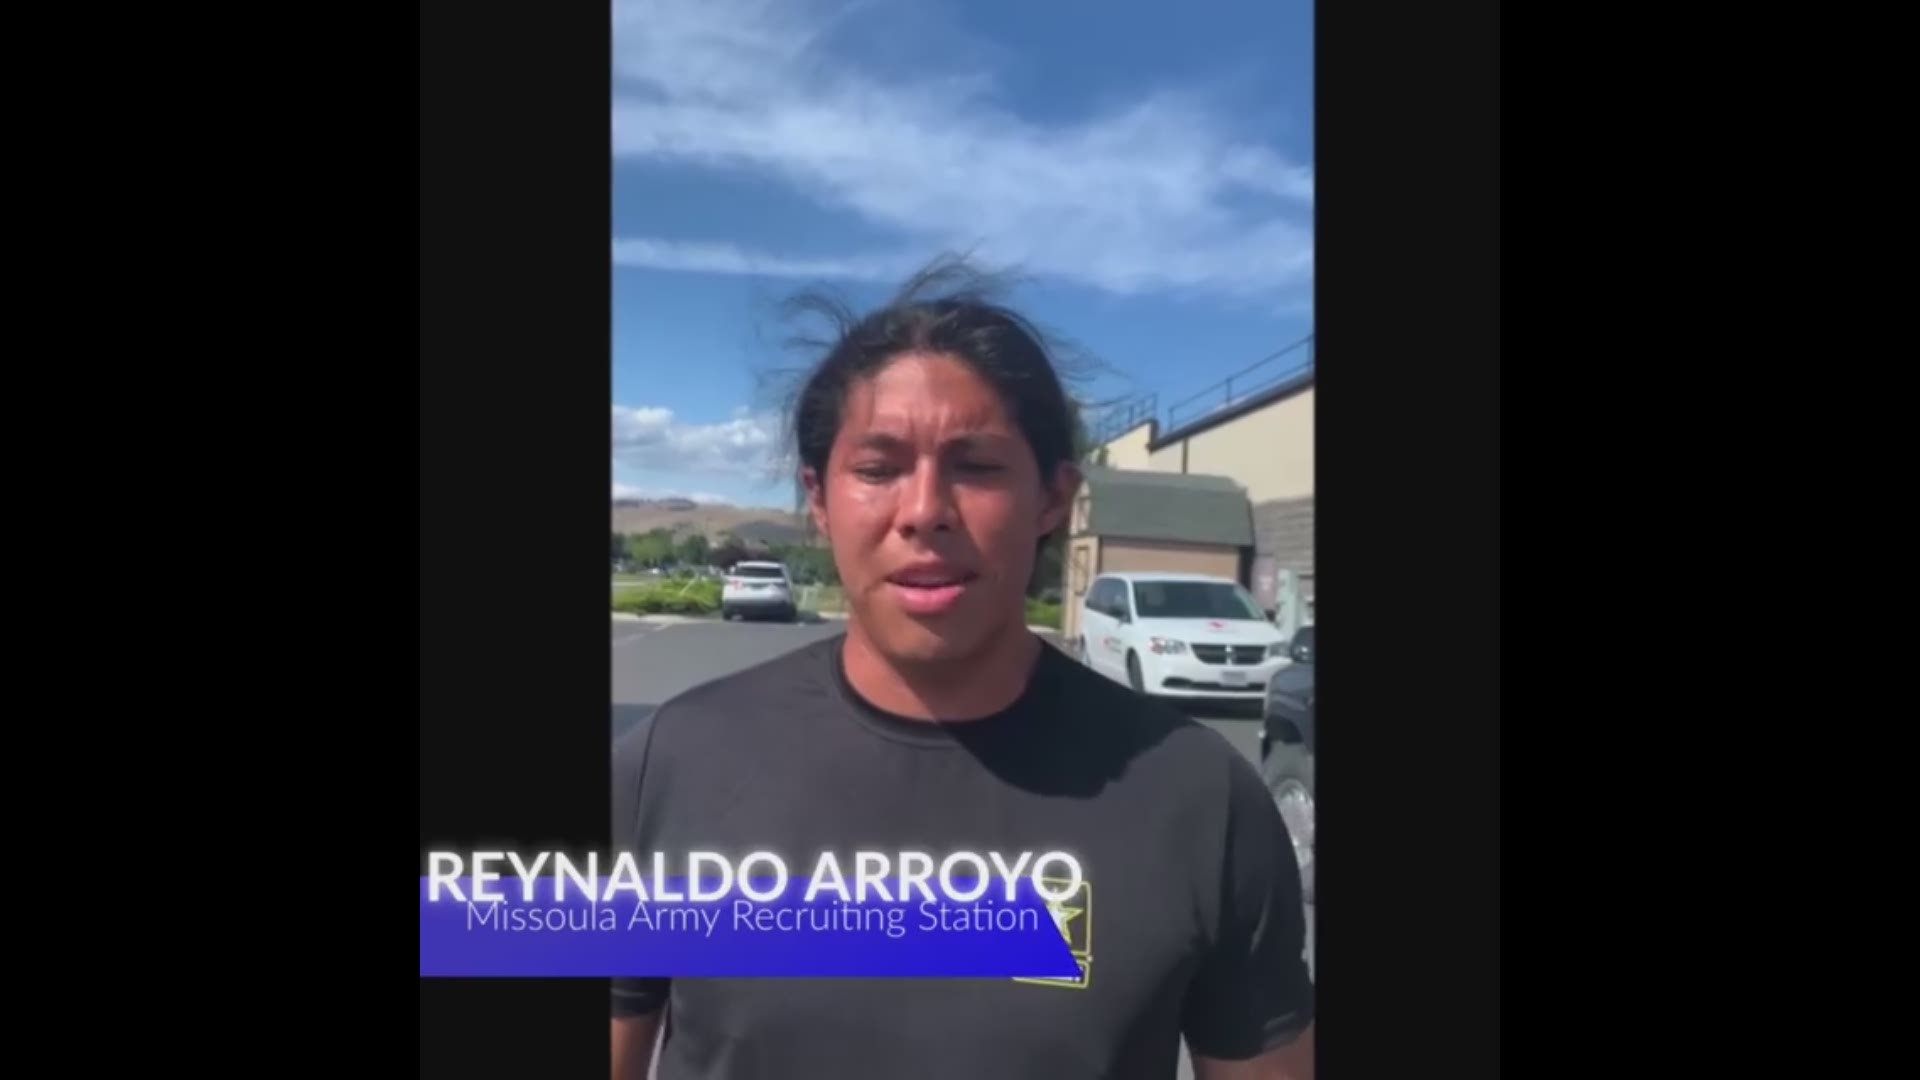 After growing his hair for 15 years, Reynaldo Arroyo donated it to Locks of Love when he enlisted in the Army.